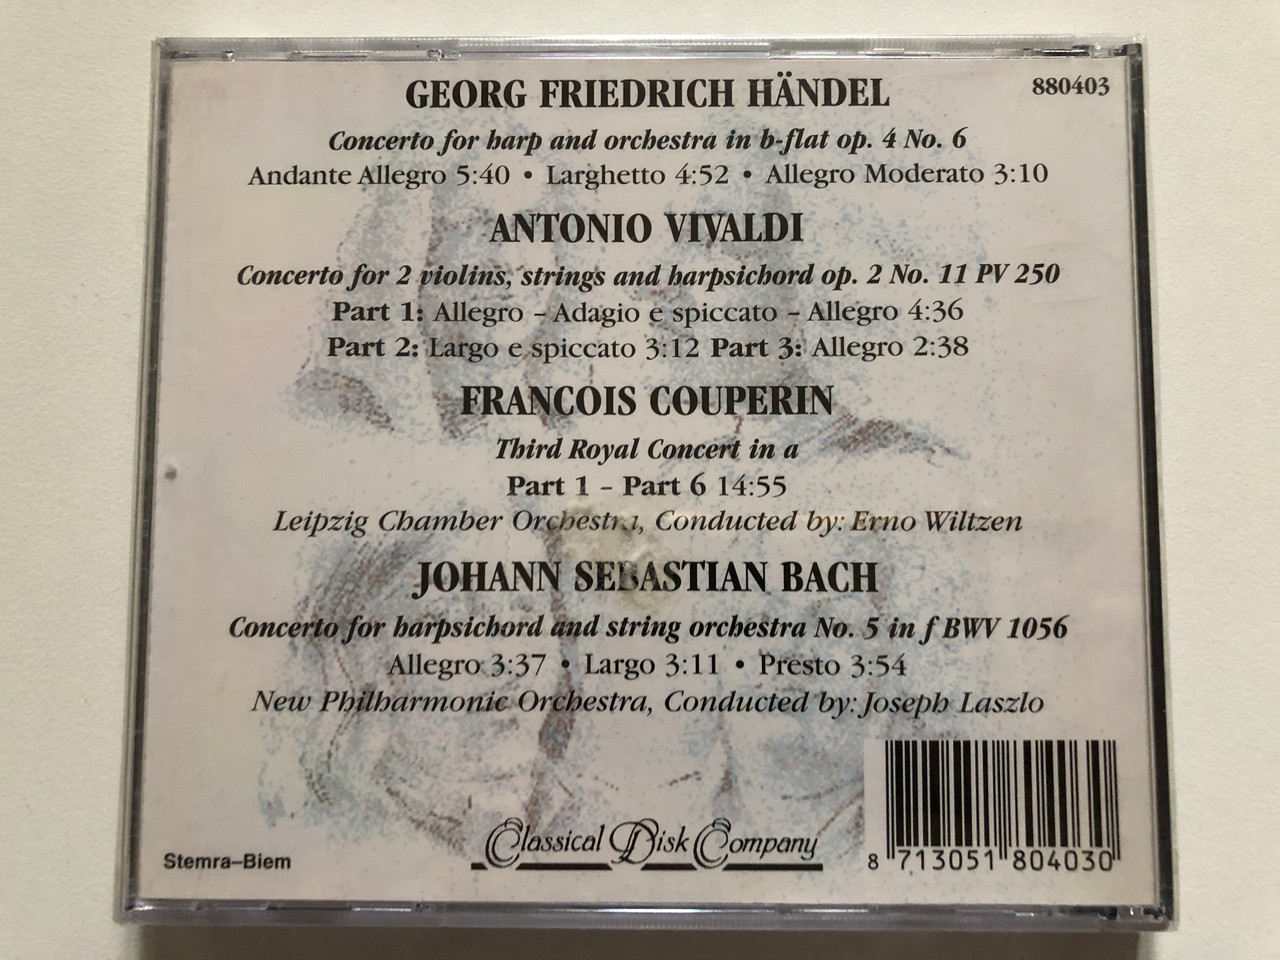 https://cdn10.bigcommerce.com/s-62bdpkt7pb/products/0/images/311378/Georg_Friedrich_Hndel_Concerto_For_Harp_And_Orchestra_Antonio_Vivaldi_Concerto_For_2_Violins_Strings_And_Harpsichord_Franois_Couperin_Third_Royal_Concert_Johann_Sebastian_Bach_Classic__13058.1699626865.1280.1280.JPG?c=2